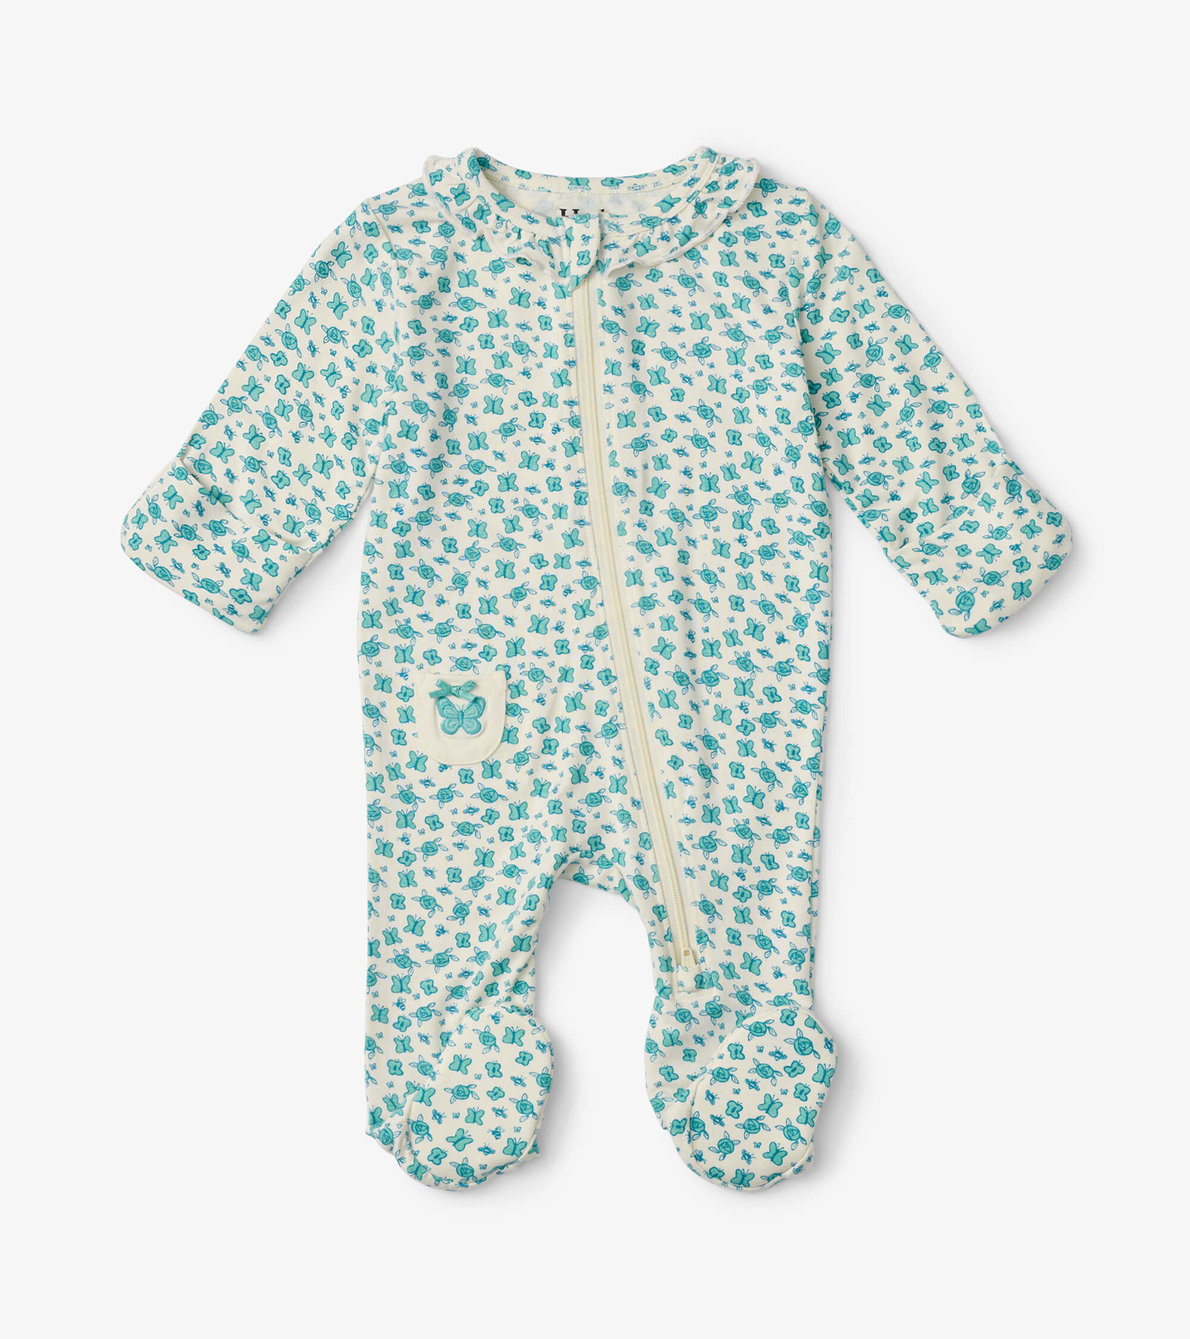 View larger image of Summer Sunshine Baby Ruffle Neck Footed Sleeper